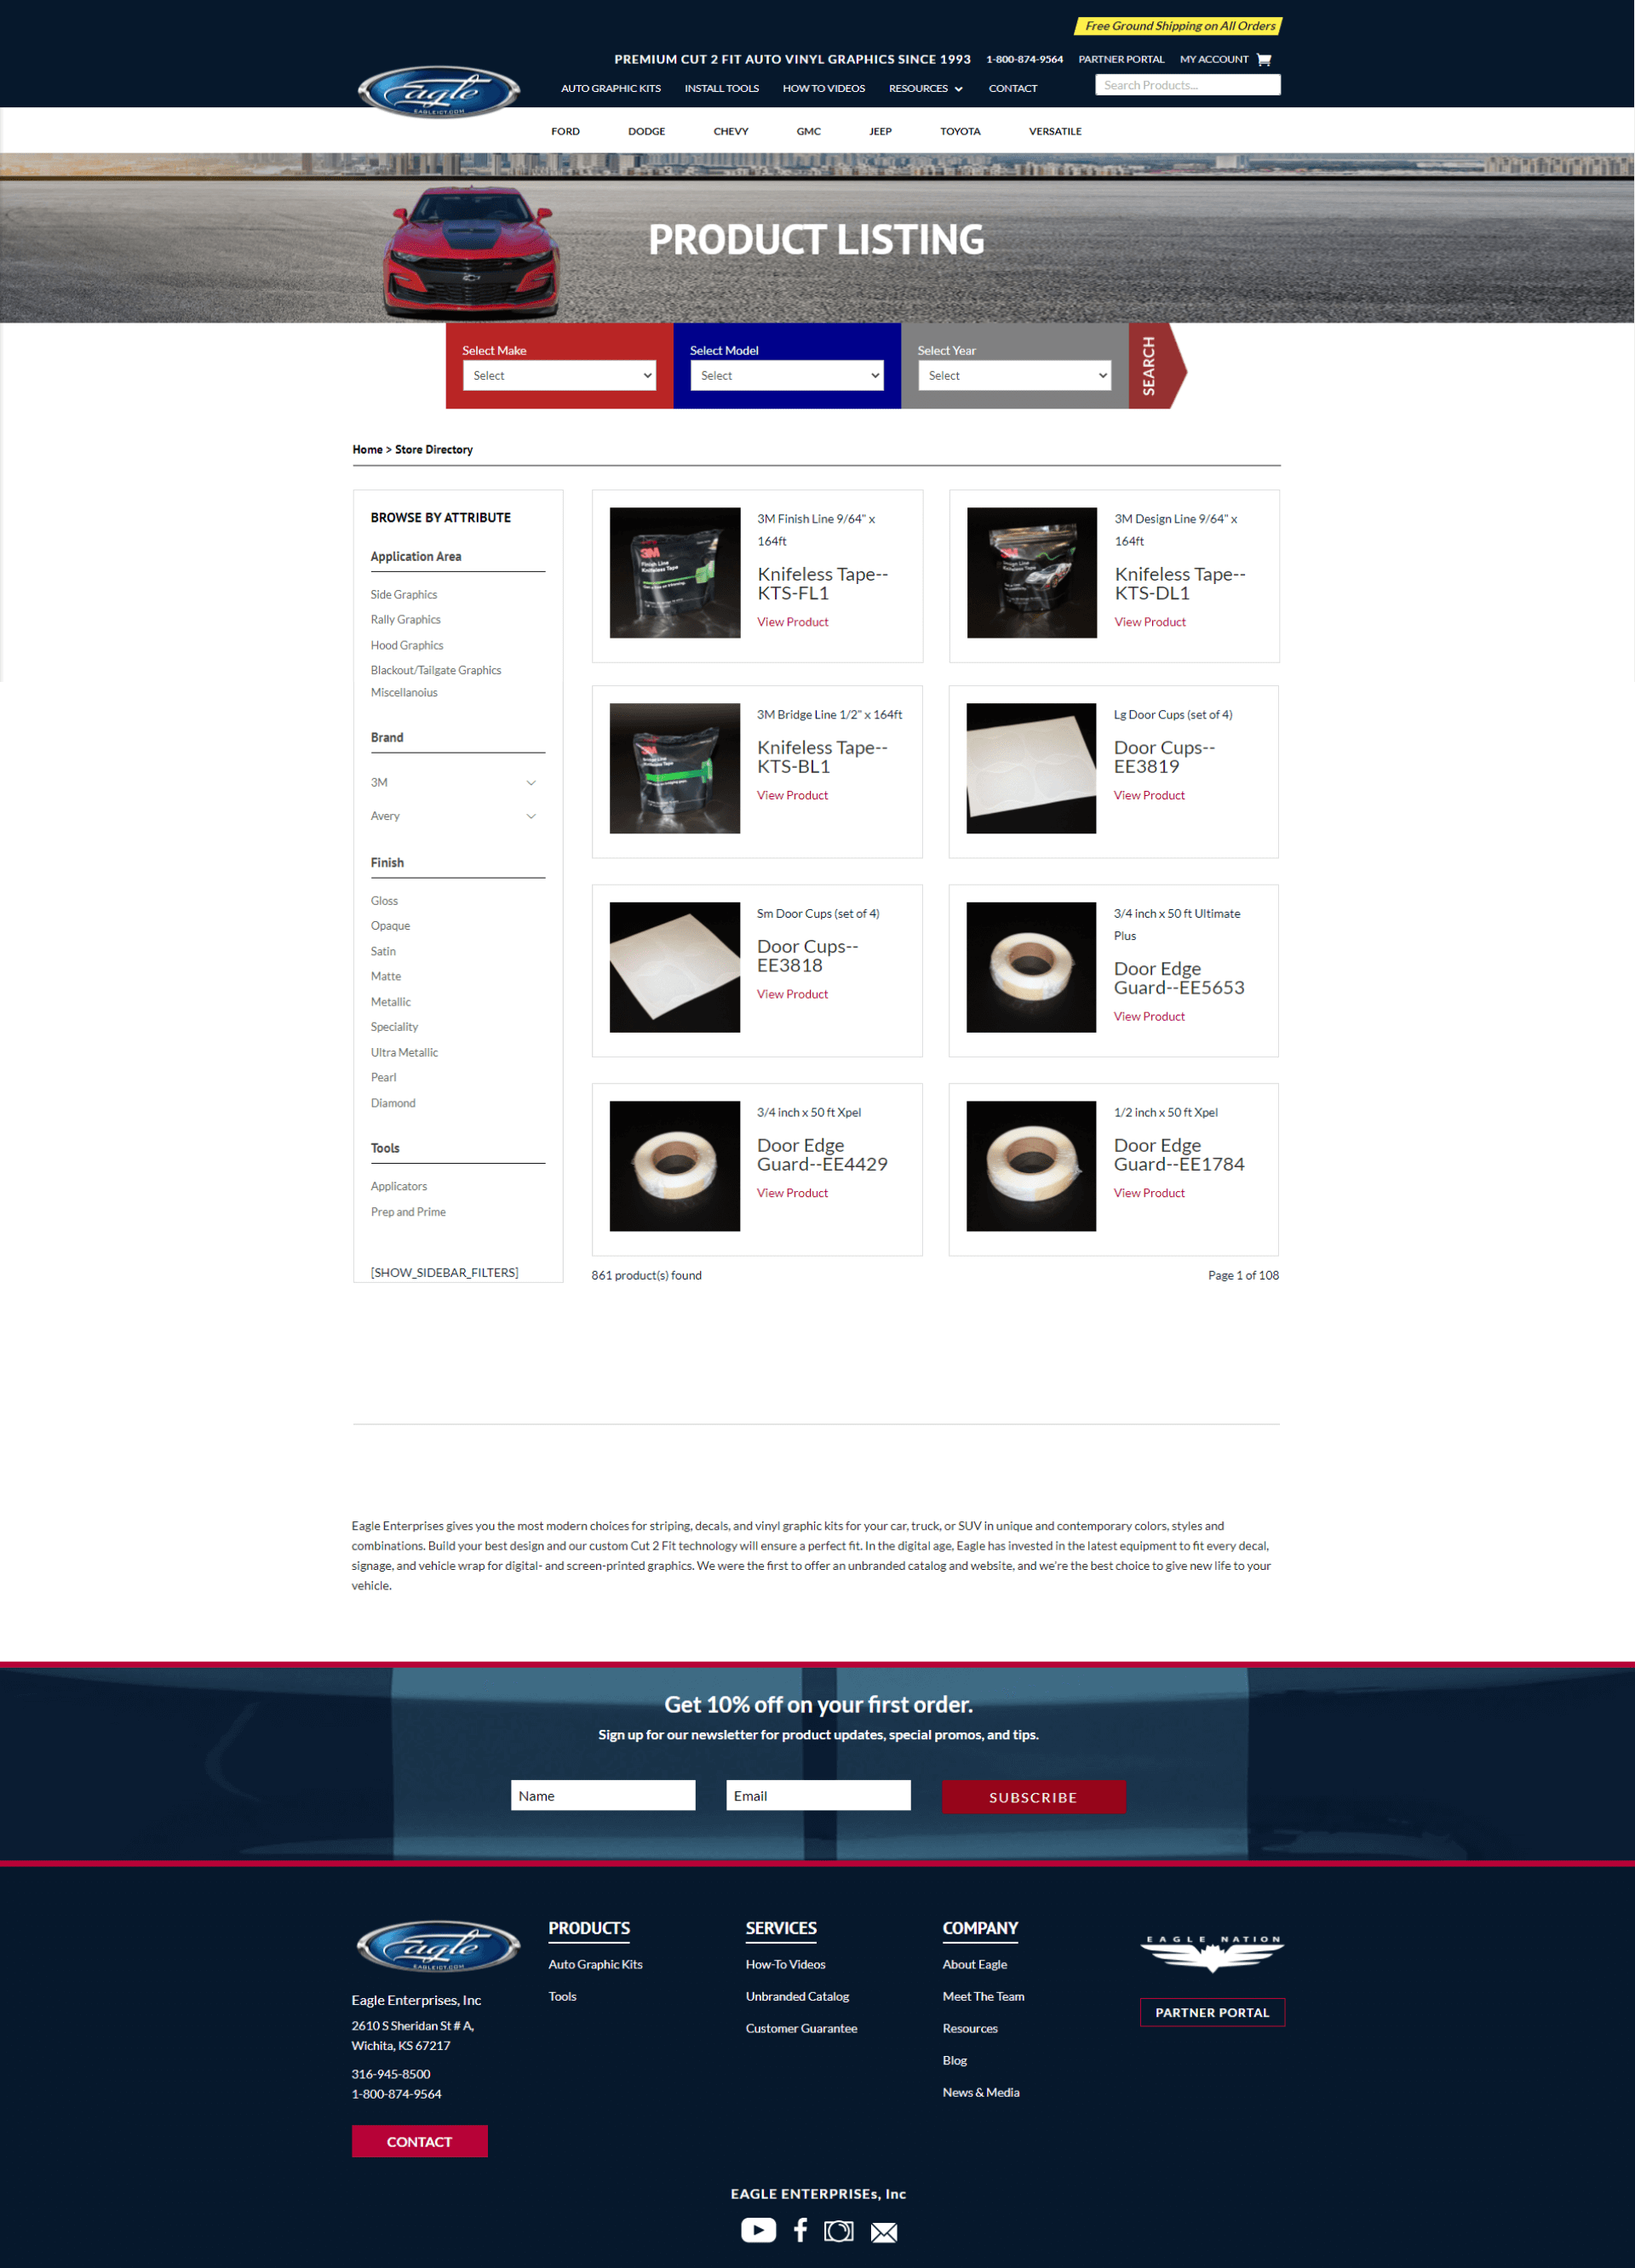 Product list page